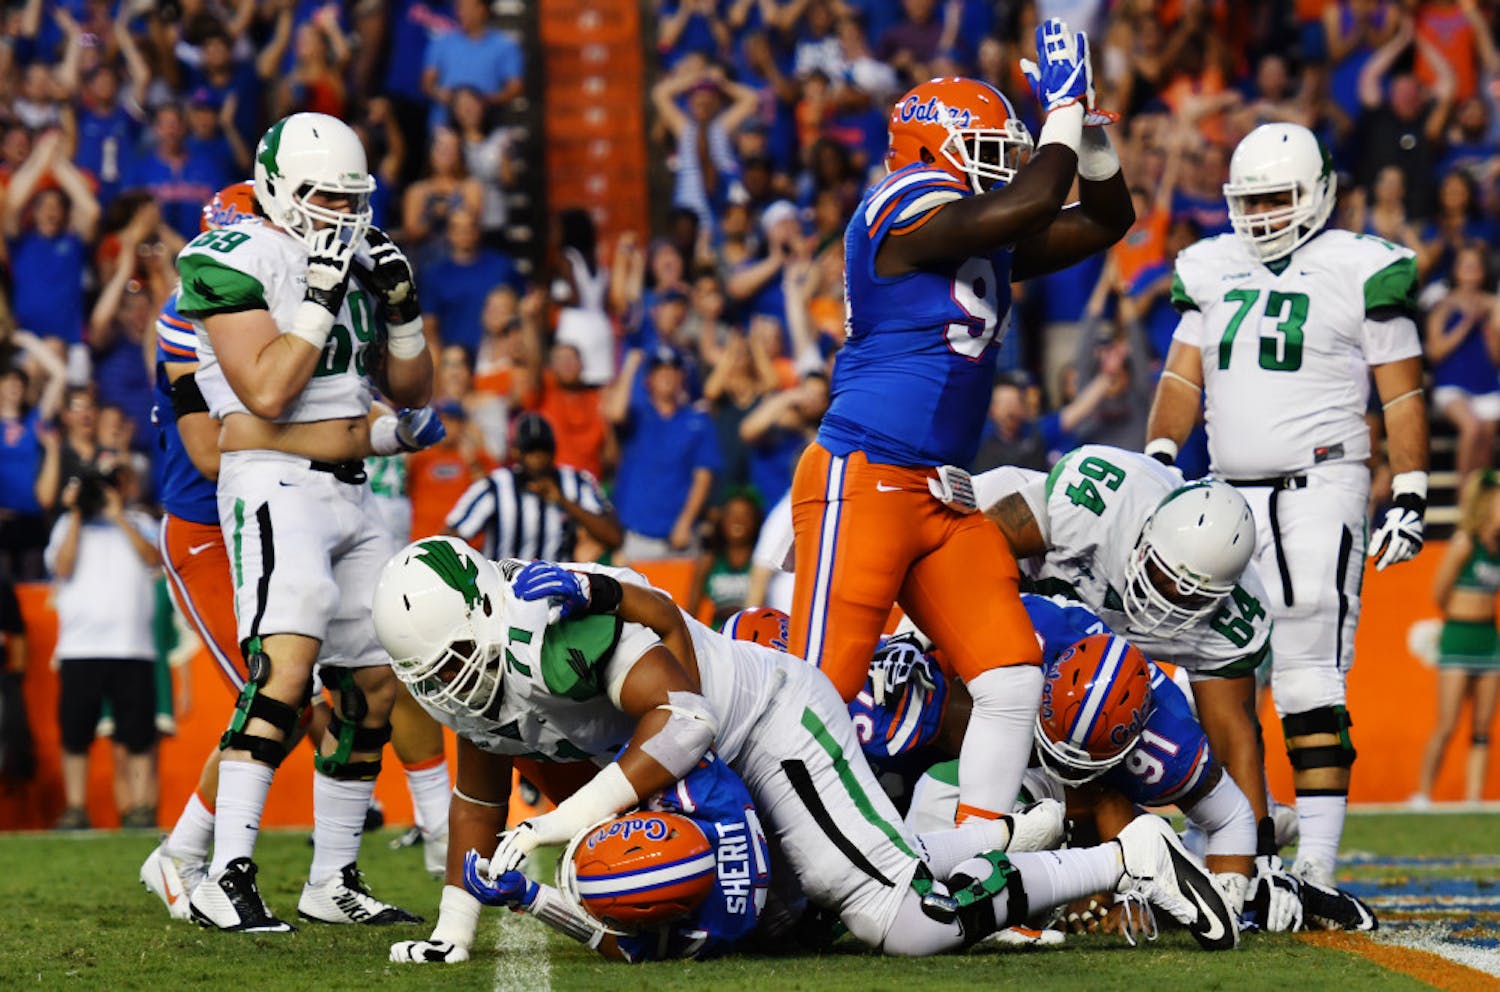 Bryan Cox signals for a safety during Florida's 32-0 win over North Texas on Sept. 17, 2016, at Ben Hill Griffin Stadium.